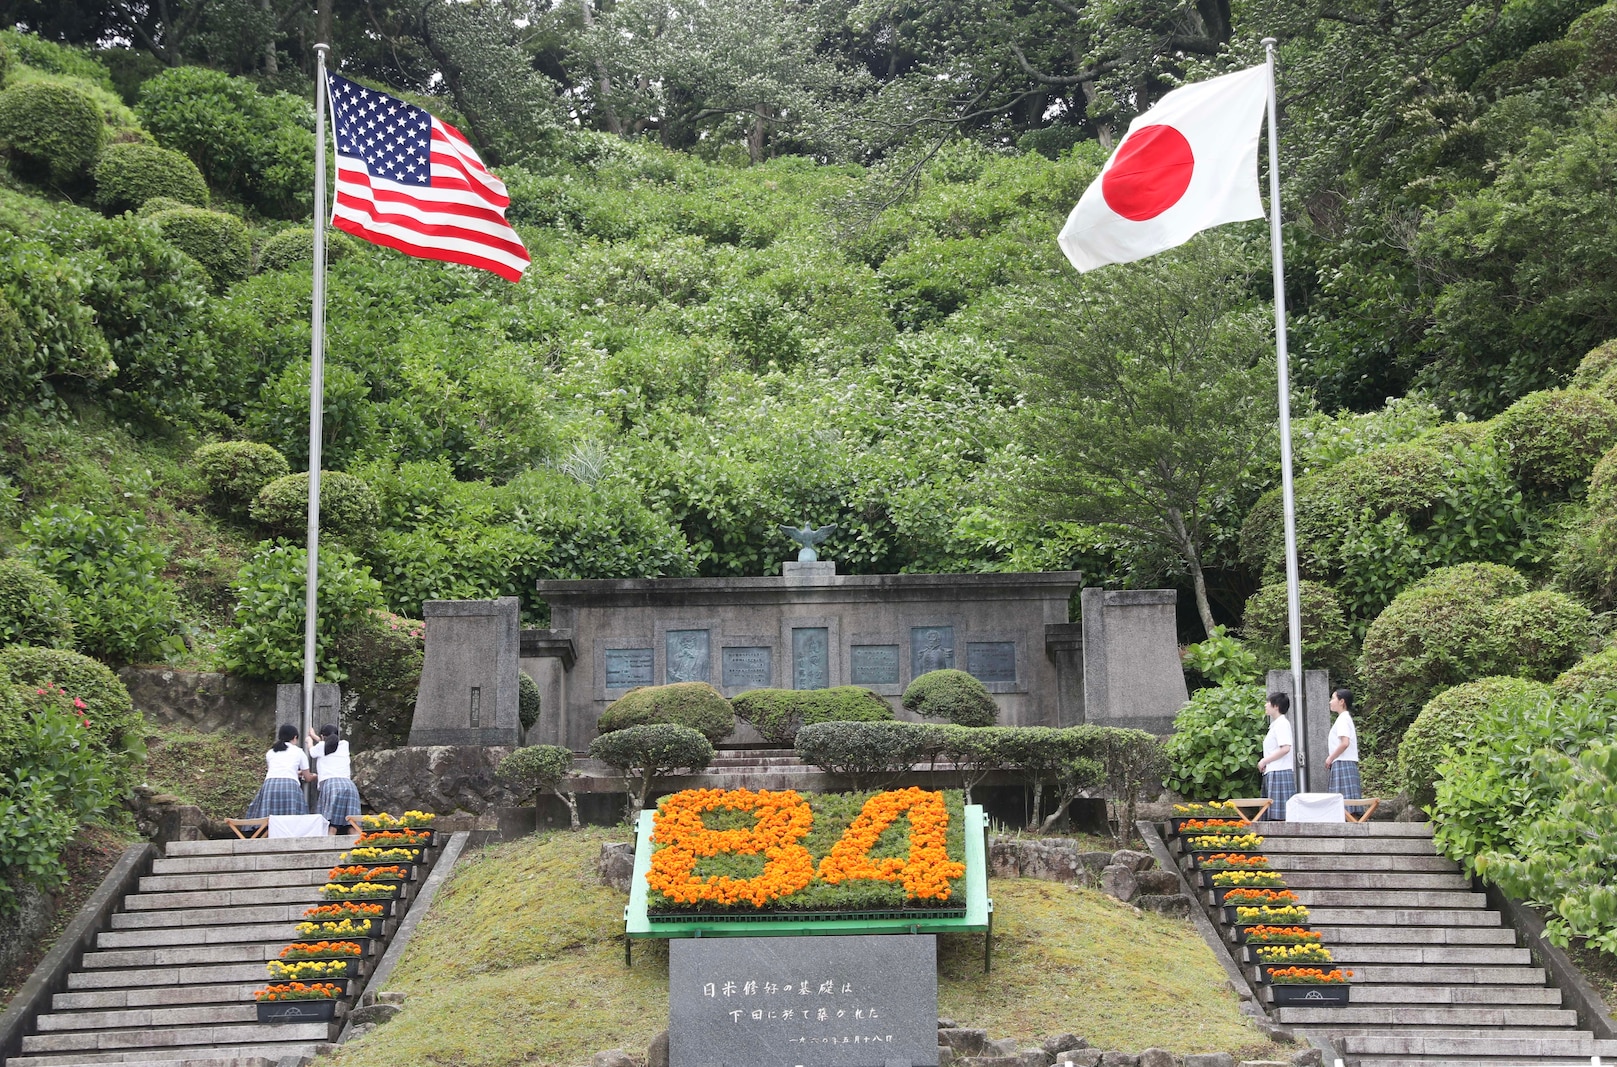 The Japanese and American flags are raised during the official ceremony for the 84th Black Ship Festival, May 20. The Black Ship Festival is held annually in Shimoda to commemorate the arrival of Commodore Matthew Perry to Japan in 1853, a historical event that marked the beginning of diplomacy and trade agreements between the U.S. and Japan.